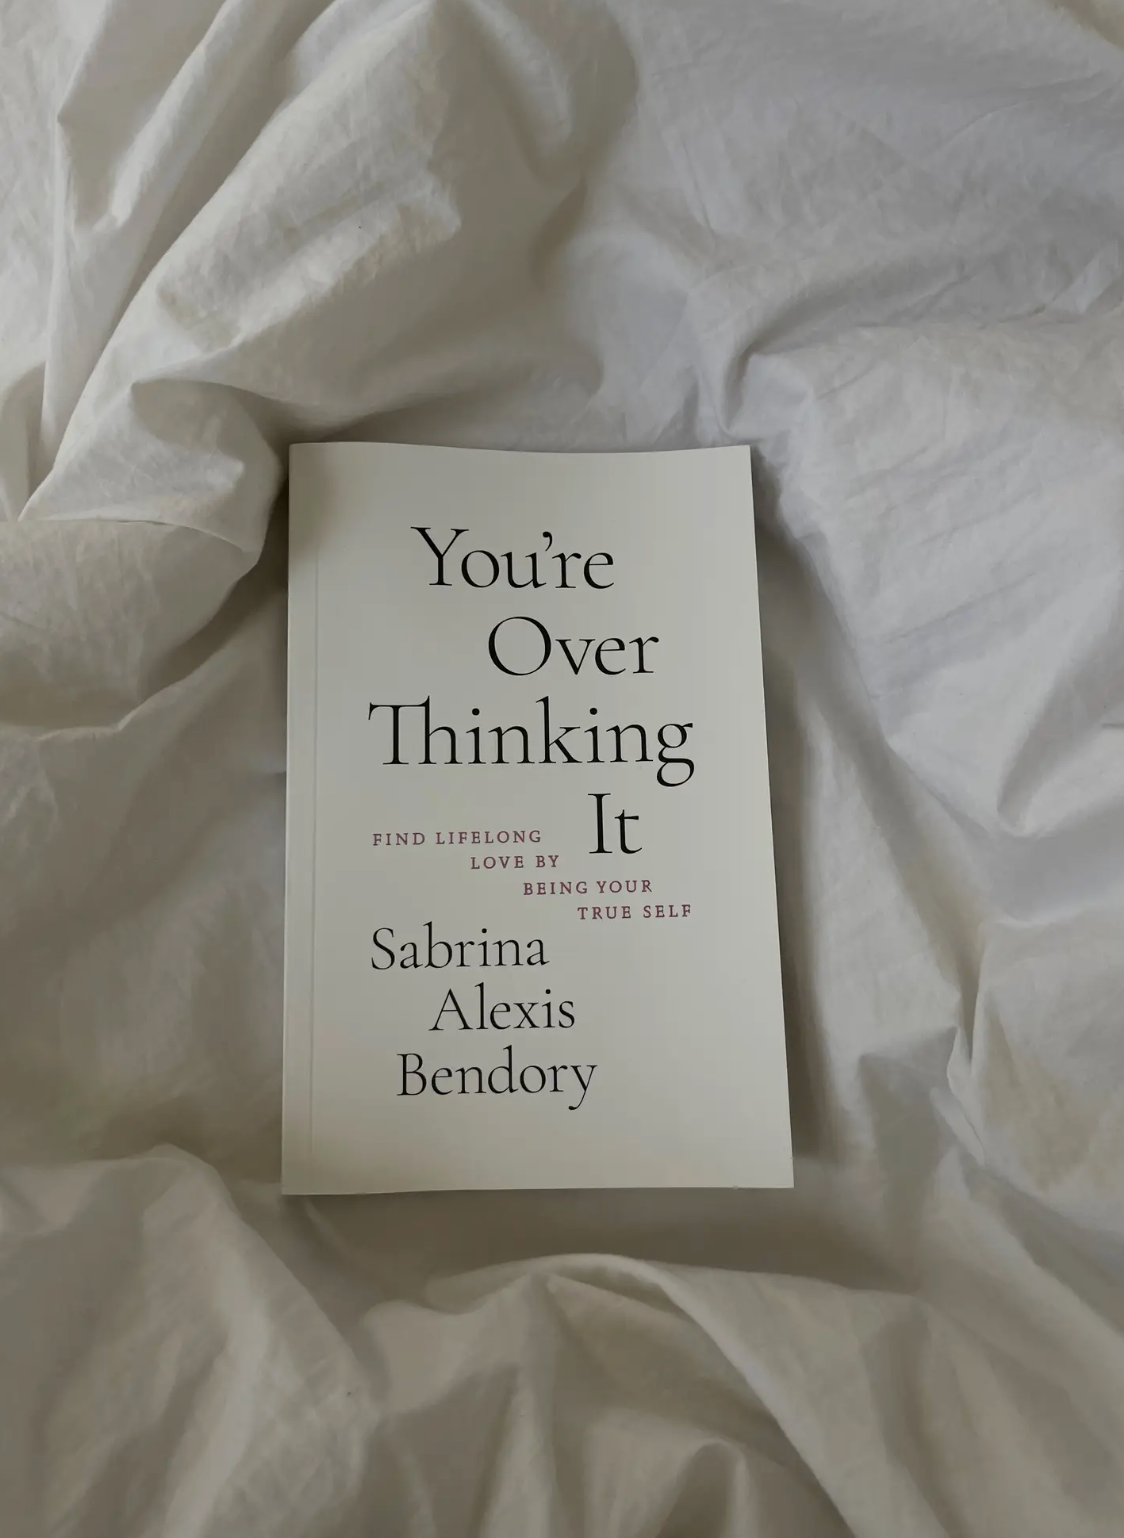 You're Overthinking It Book by Sabrina Alexis Bindery